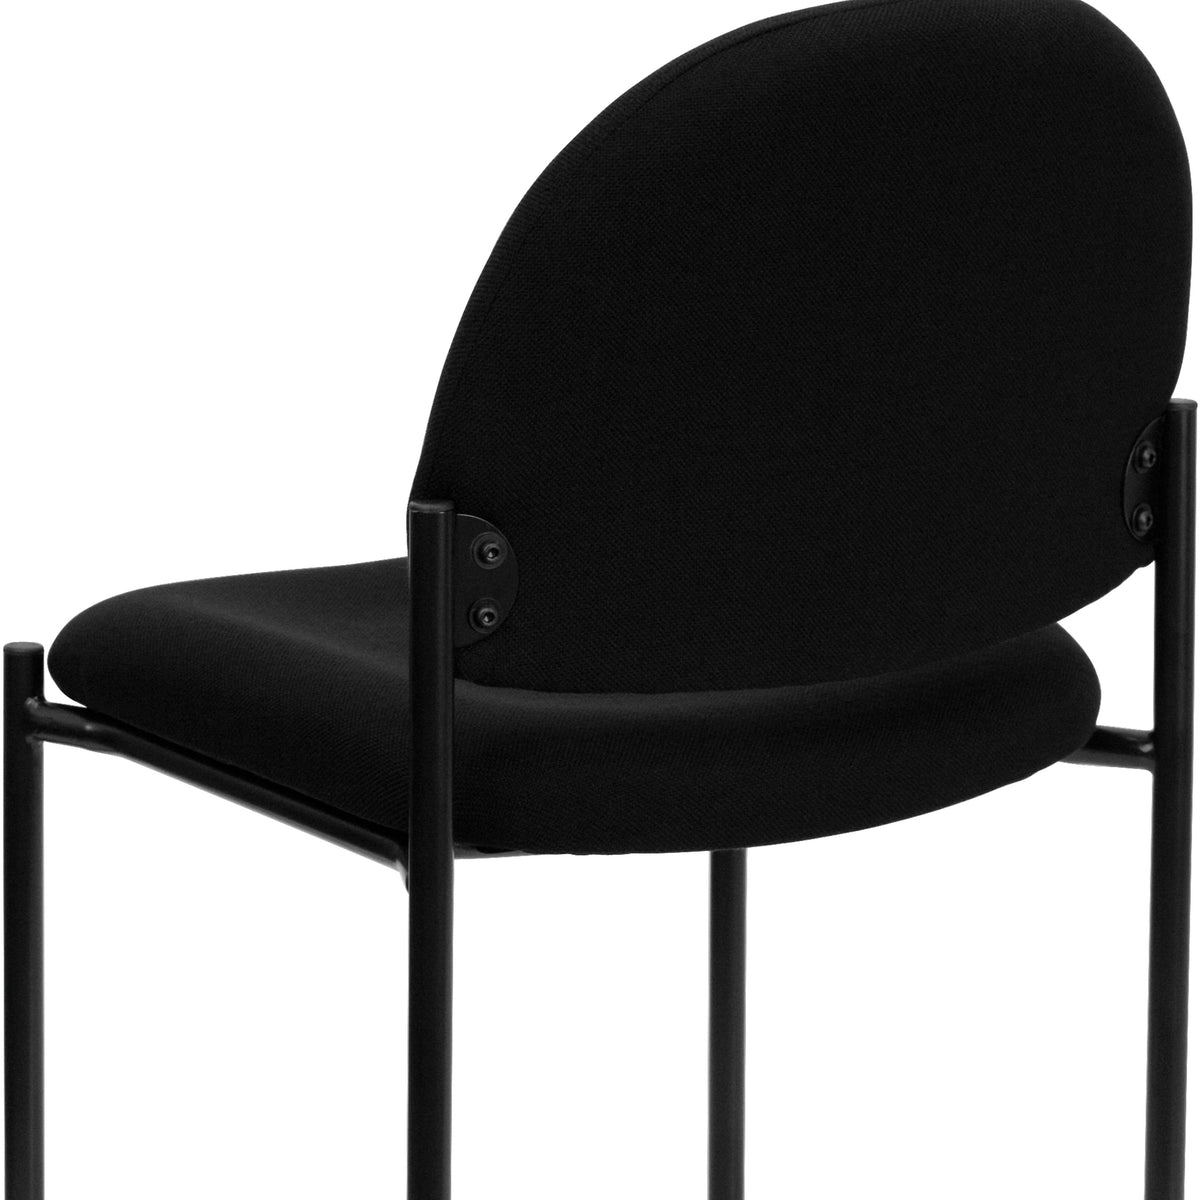 Black Fabric |#| Comfort Black Fabric Stackable Steel Side Reception Chair - Home Office